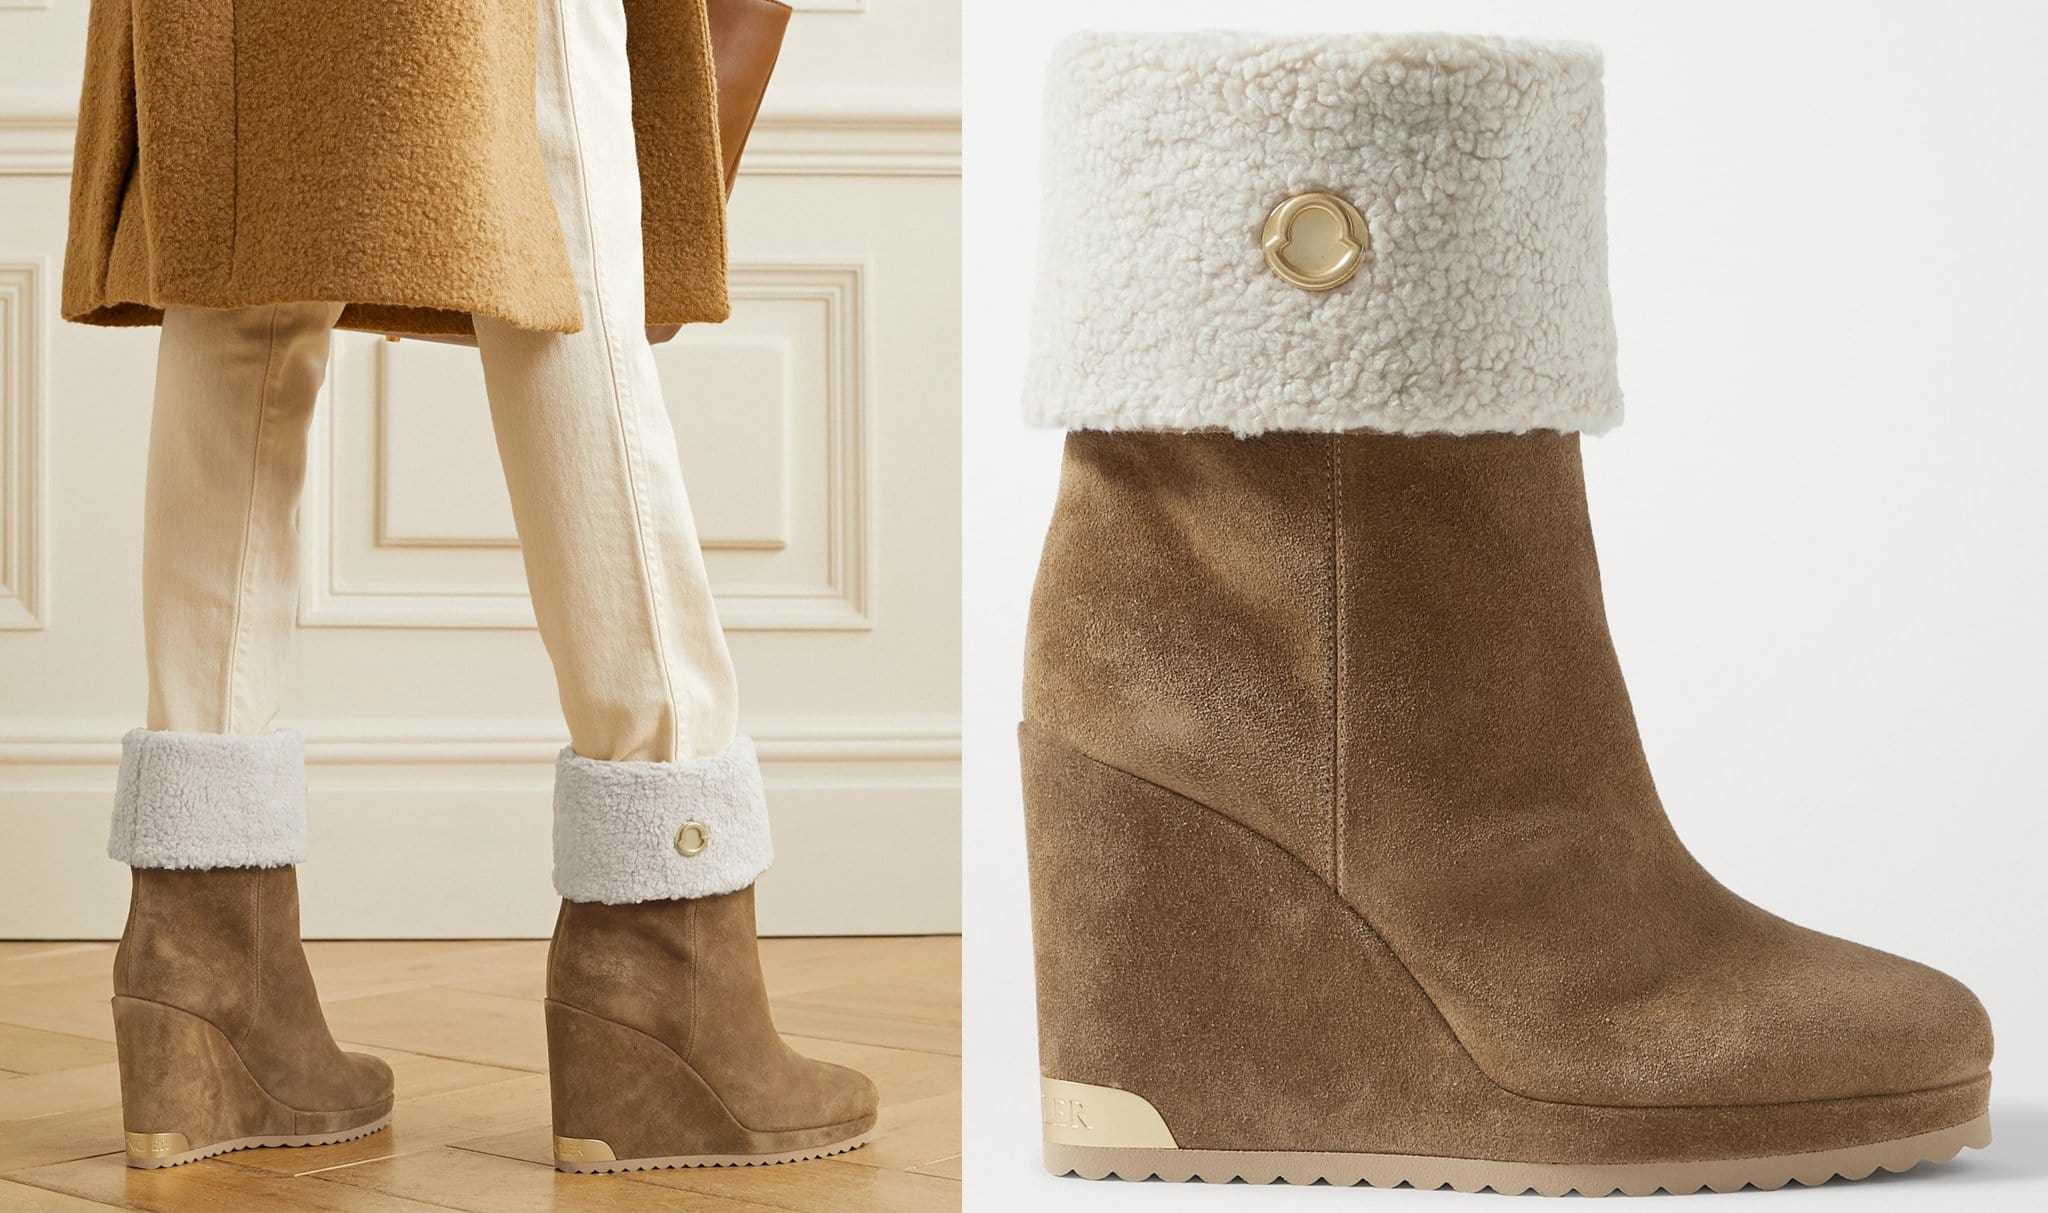 Moncler's W boots are made in Italy from supple suede, trimmed and lined with plush shearling